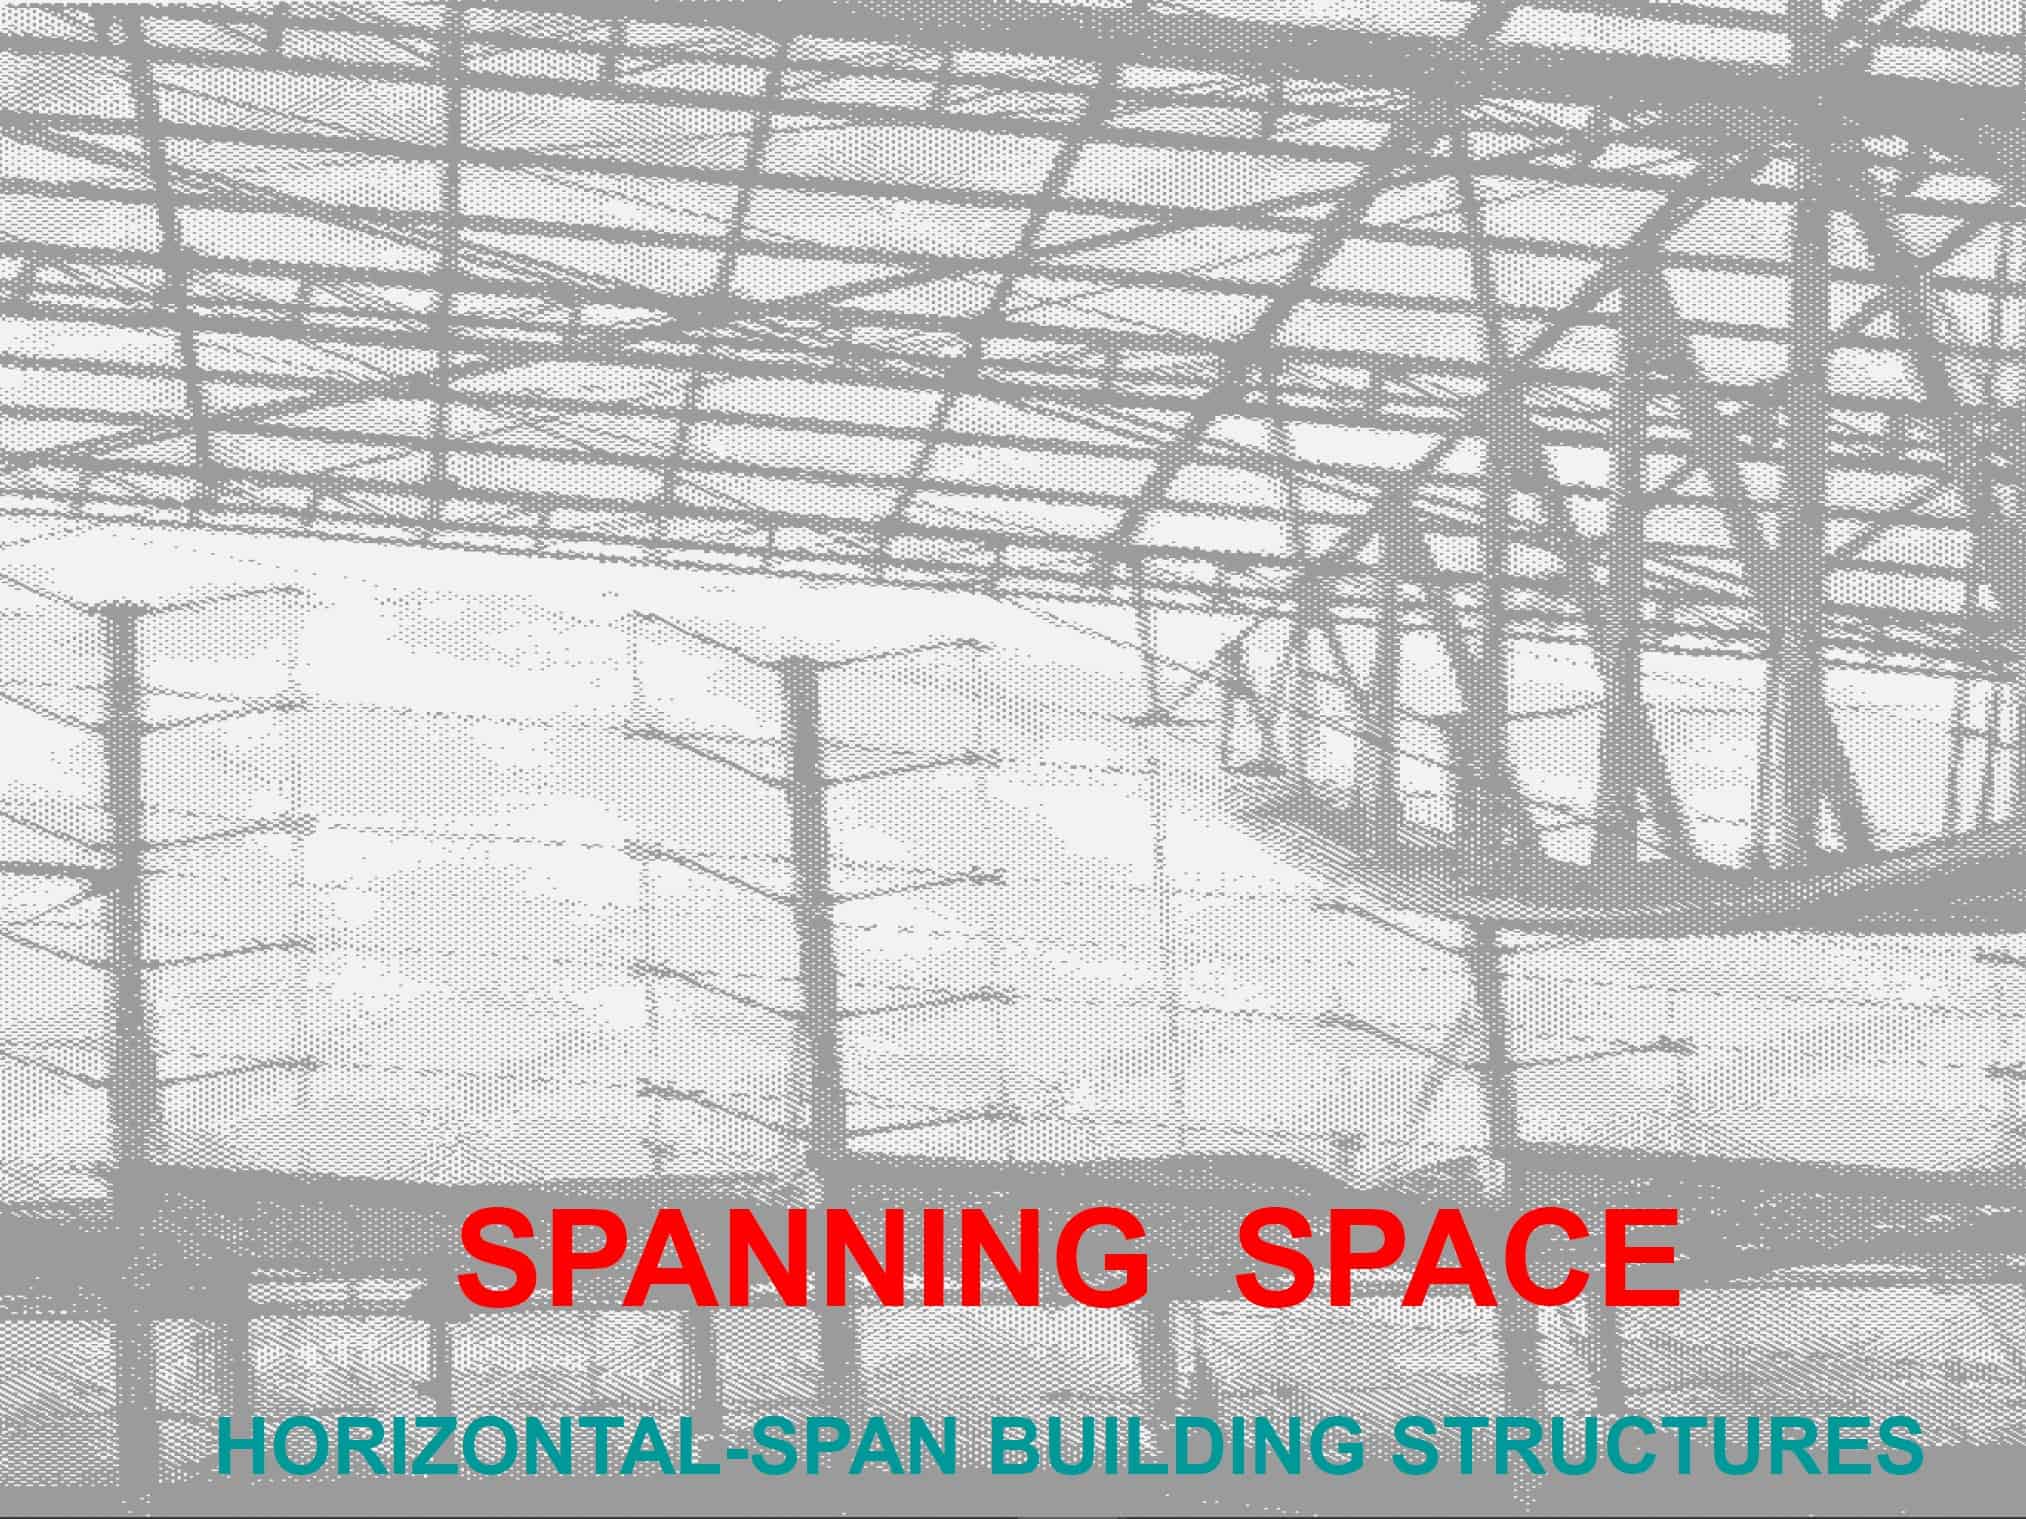 Span space. Horizontal span. Spatial span. Horizontally Spinning Goat. On span and Space.